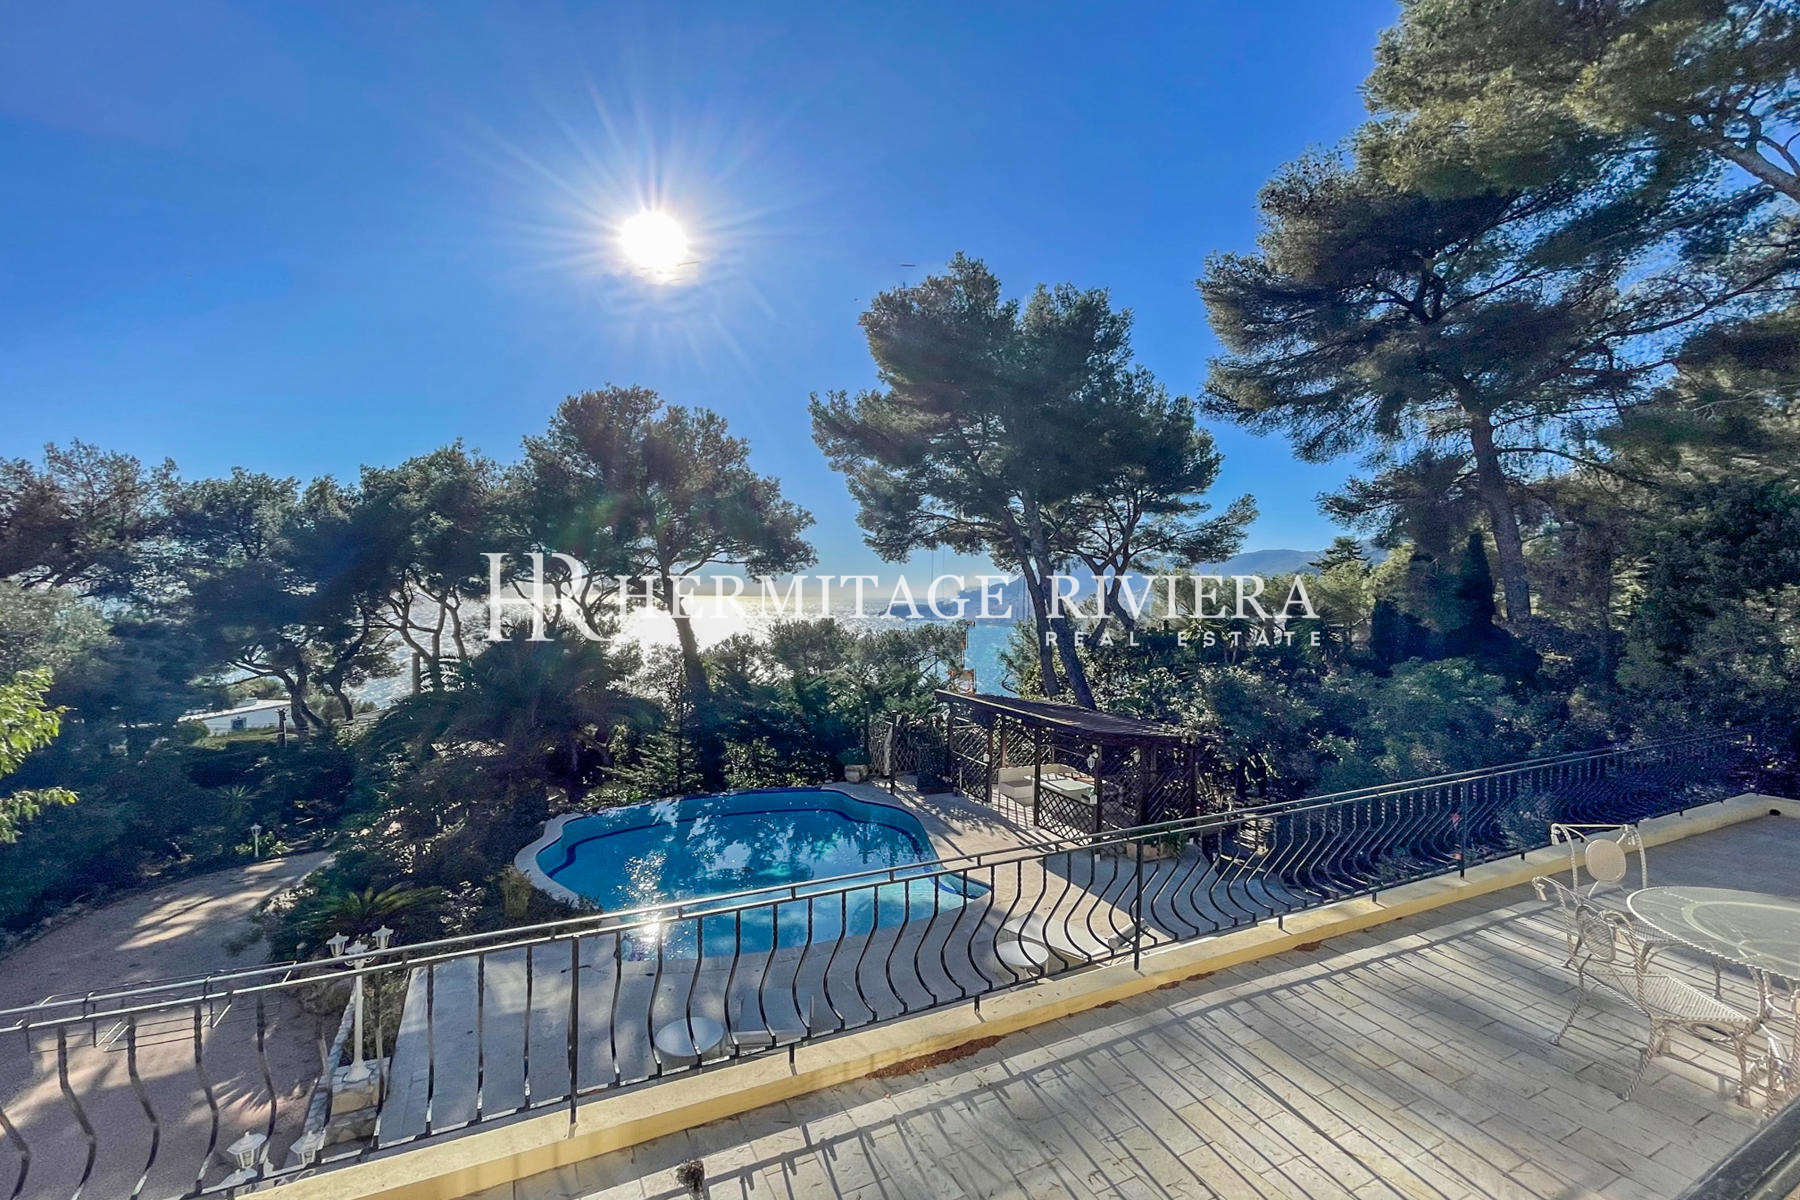 Property with views Monaco in sought after location (image 1)